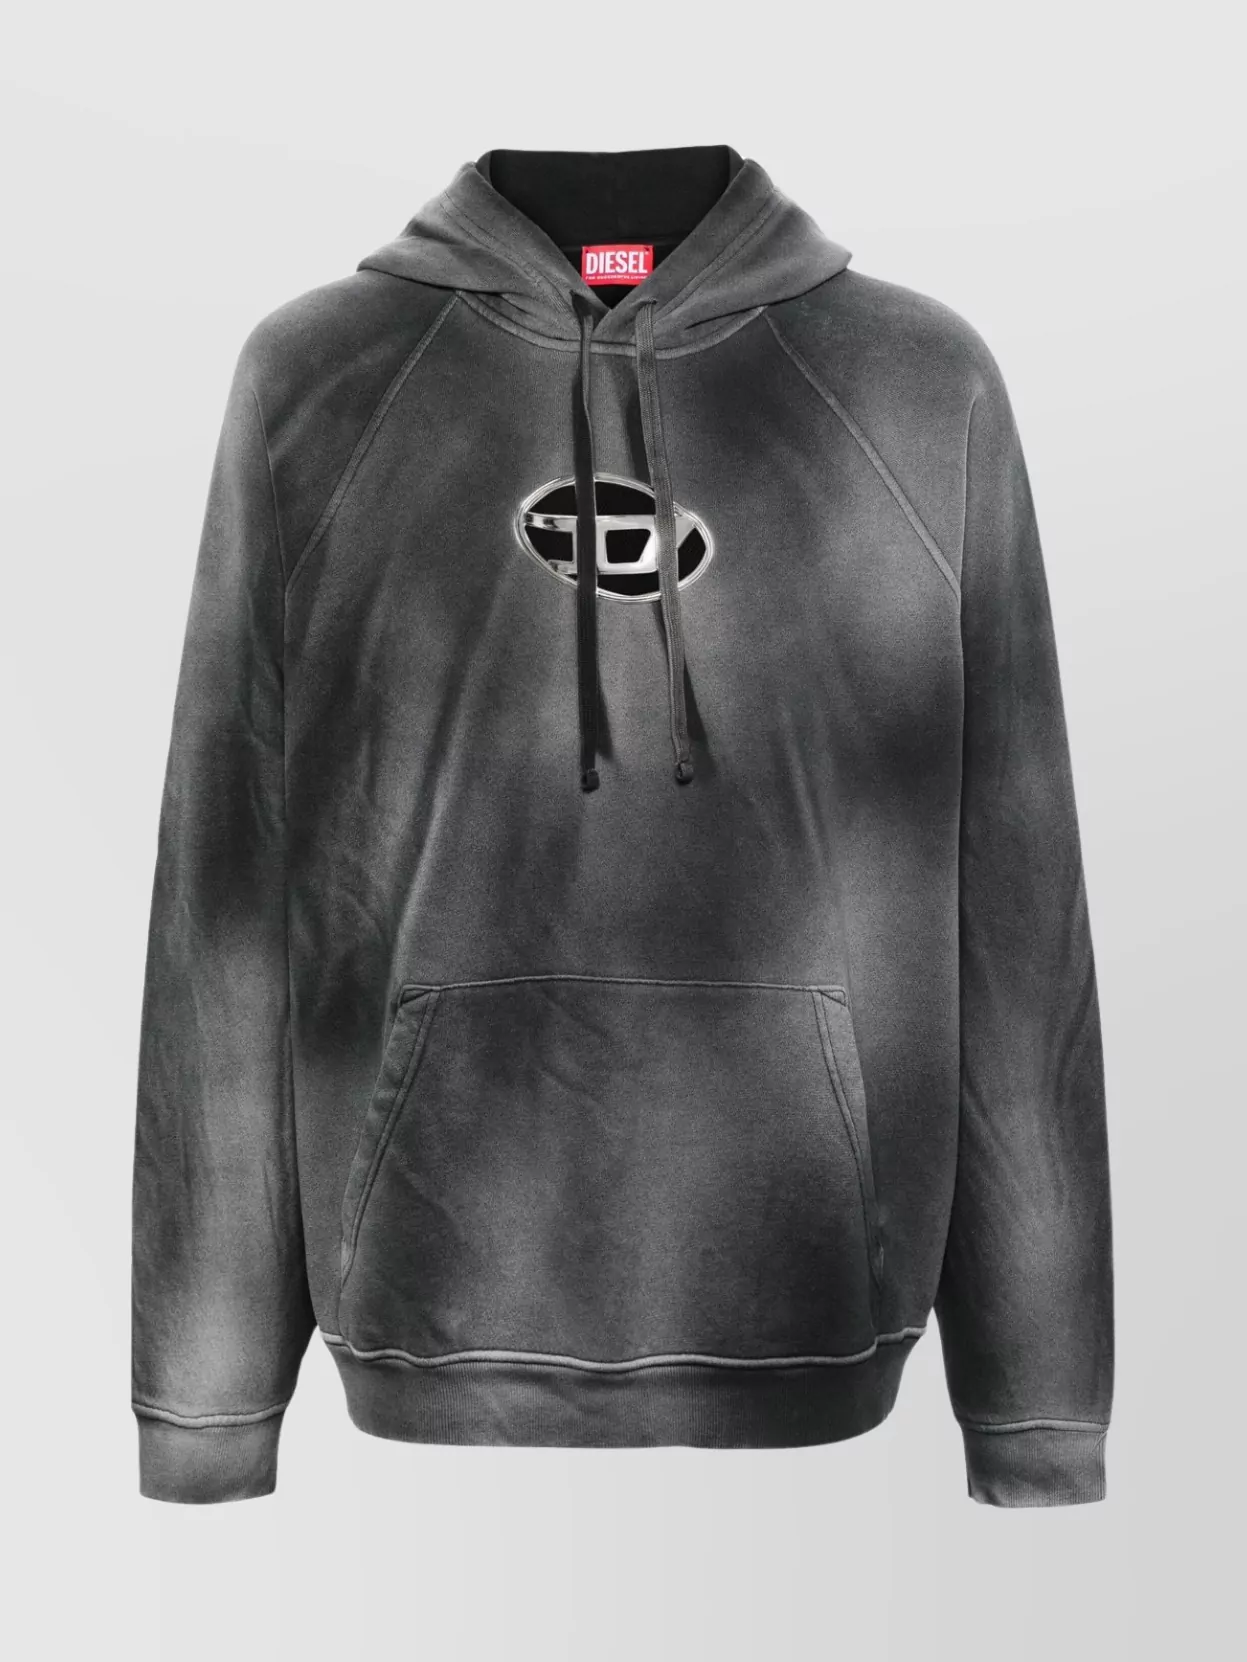 Shop Diesel Hooded Sweatshirt With Faded Effect And Pockets